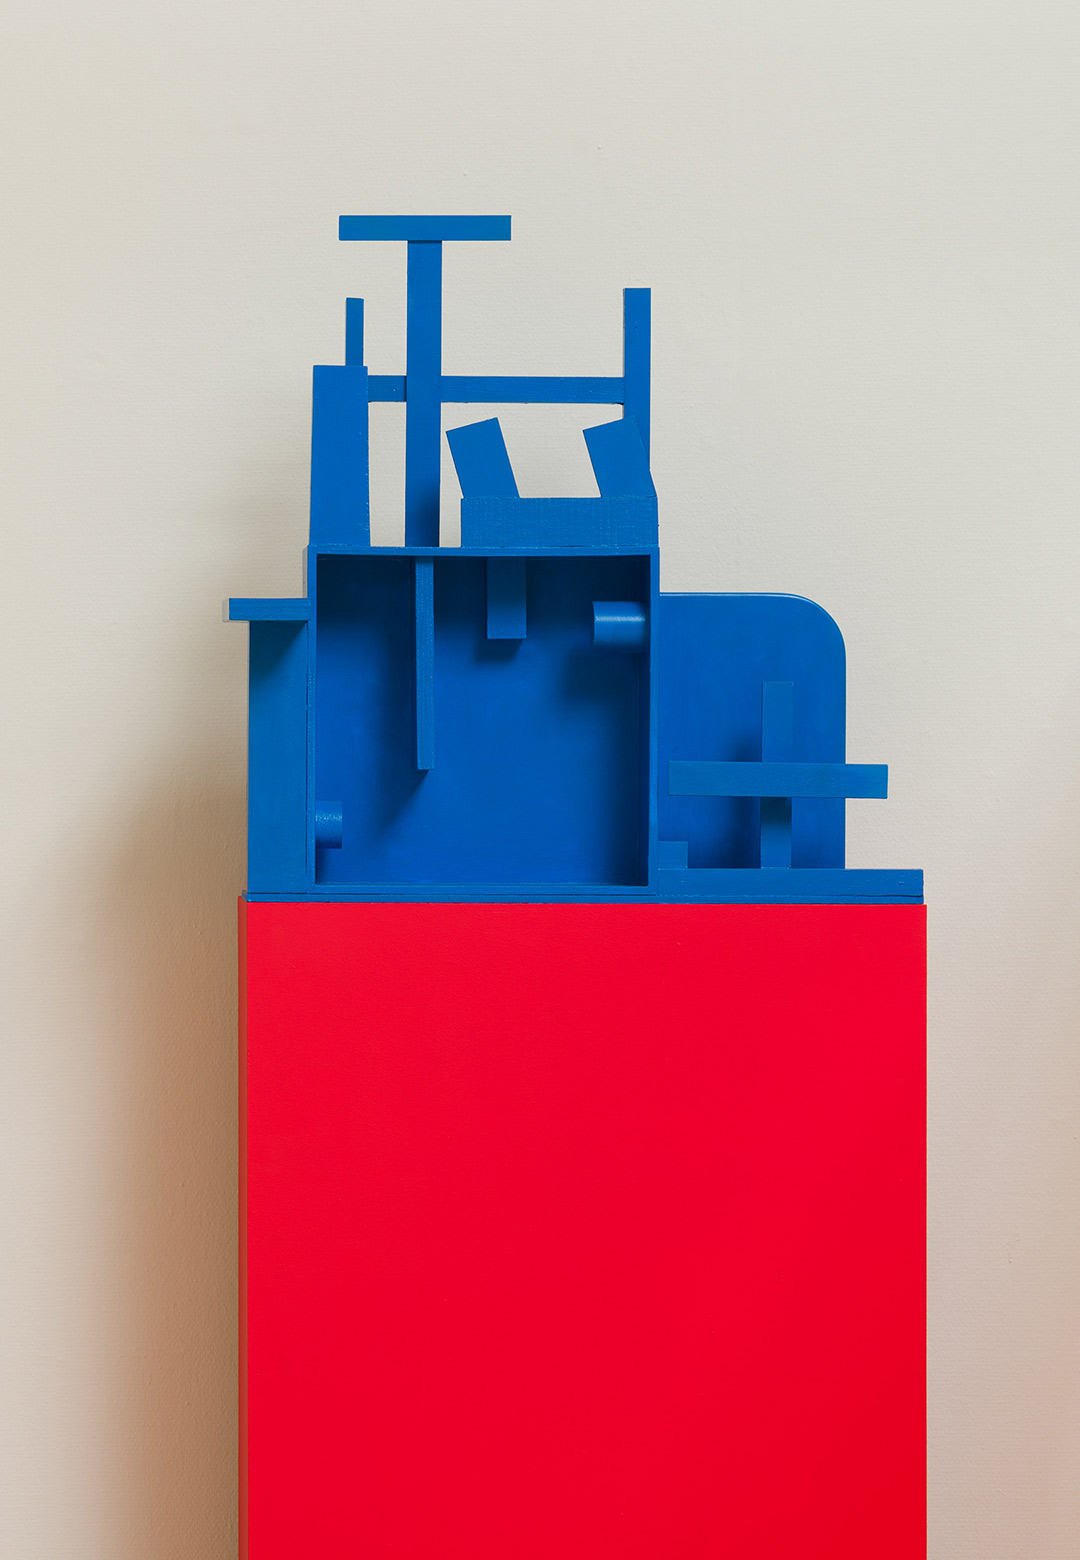 Revisiting Nathalie Du Pasquier's ‘paintings of things' and 'paintings as objects’